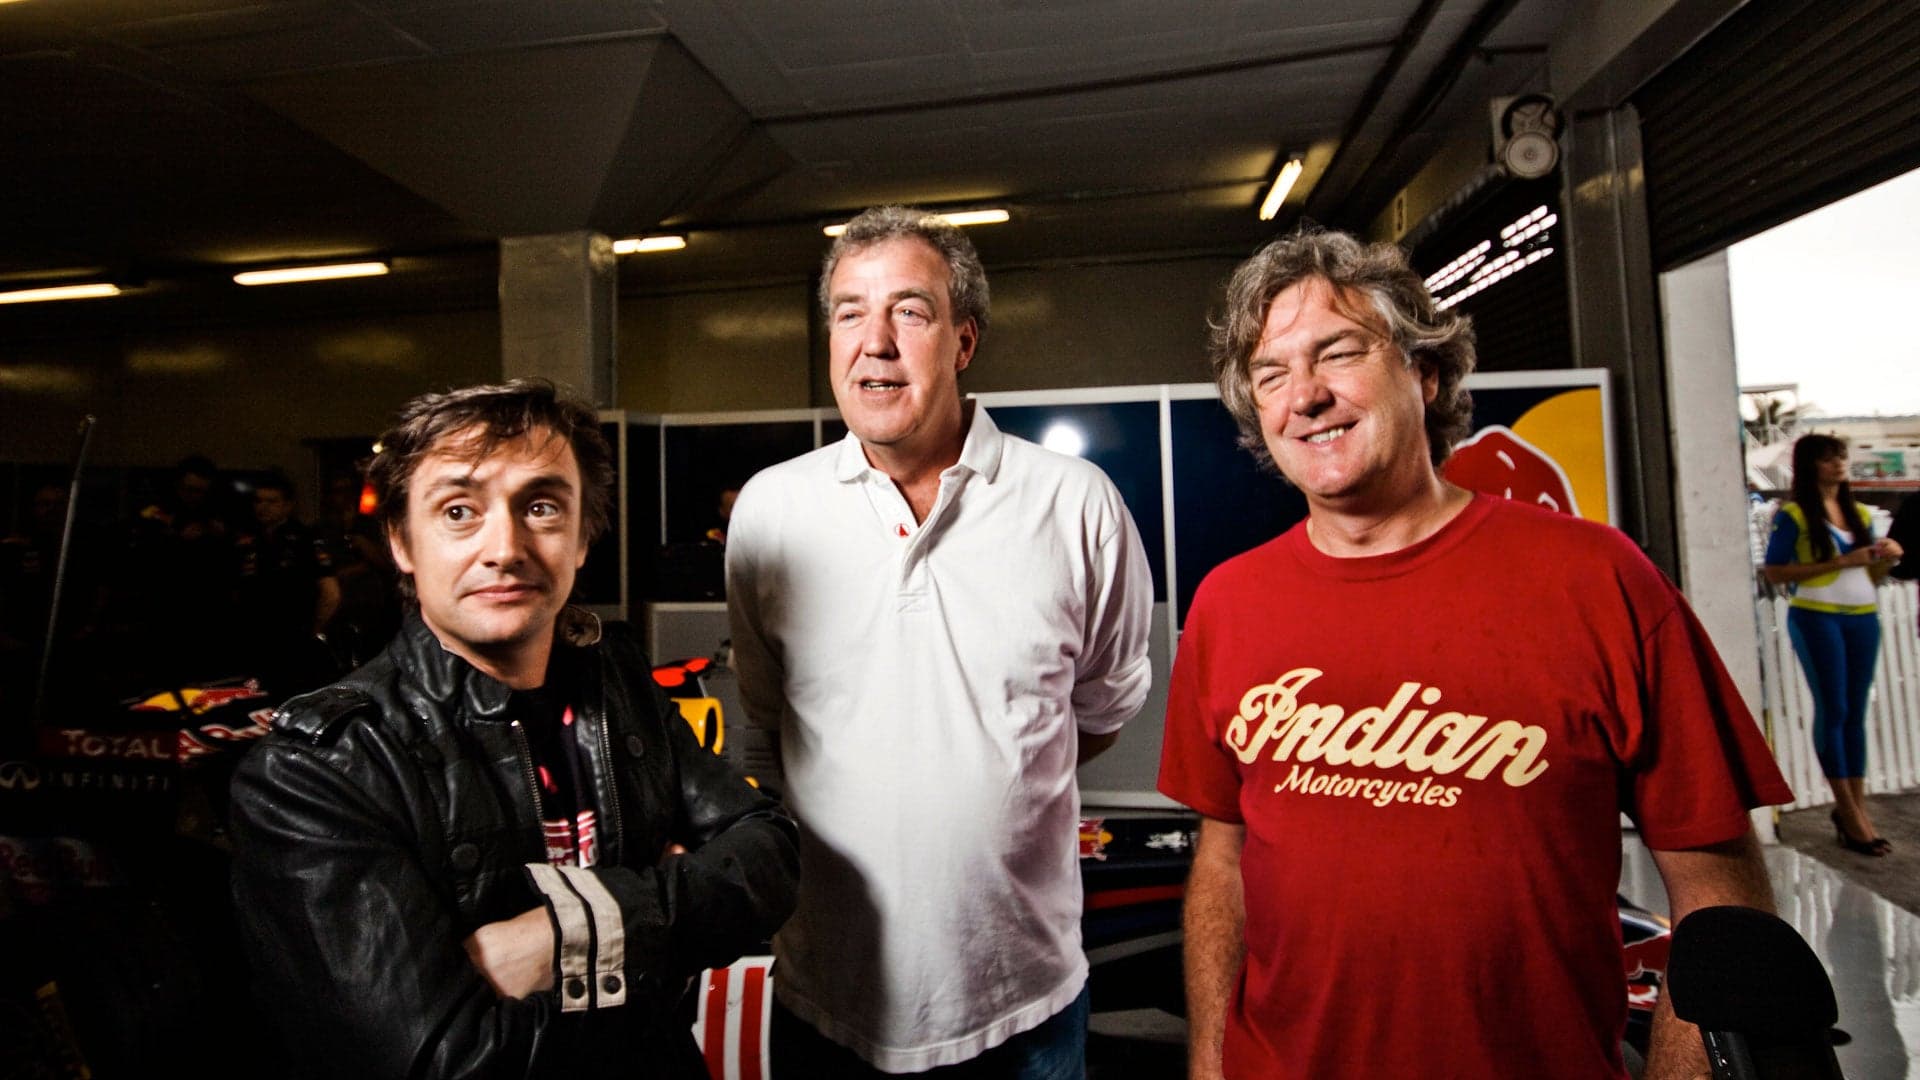 EXCLUSIVE: Inside The Grand Tour Taping in California